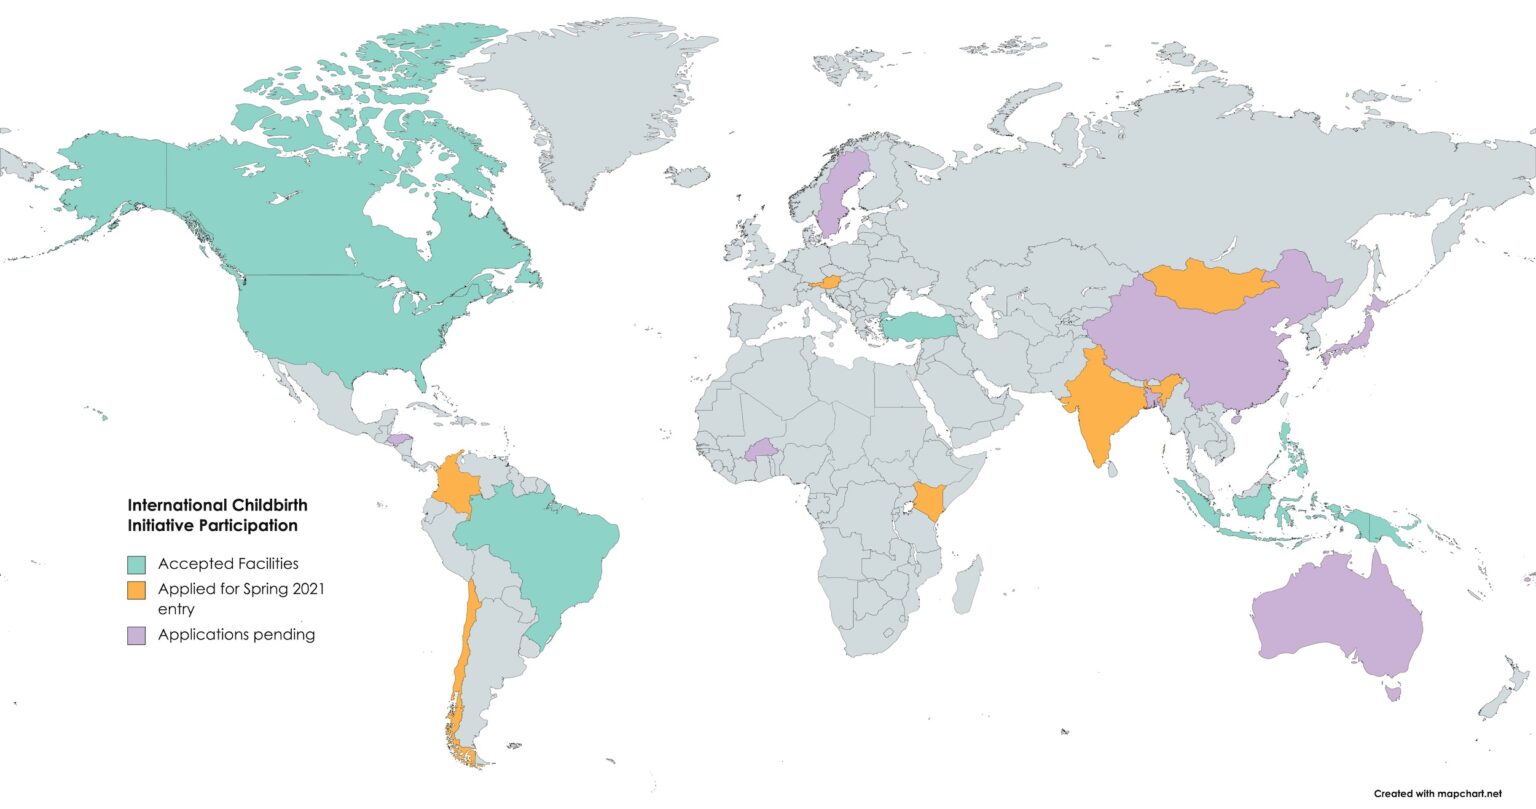 Global map indicating ICI participation